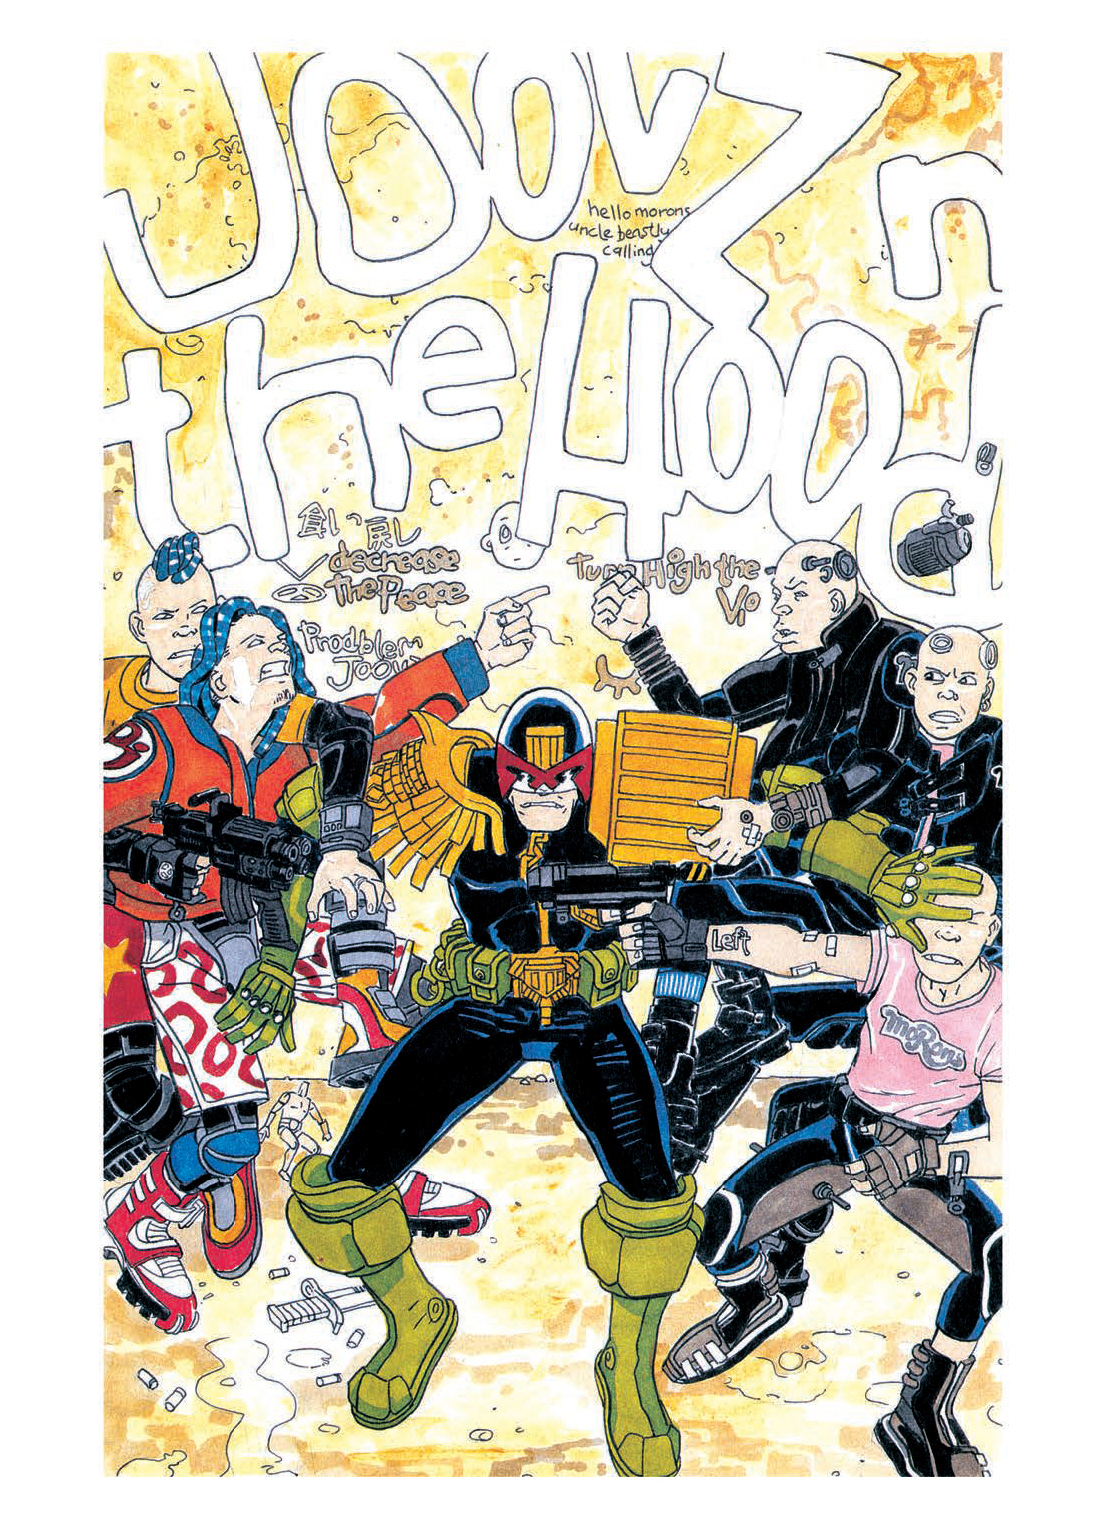 Read online Judge Dredd: The Restricted Files comic -  Issue # TPB 3 - 170